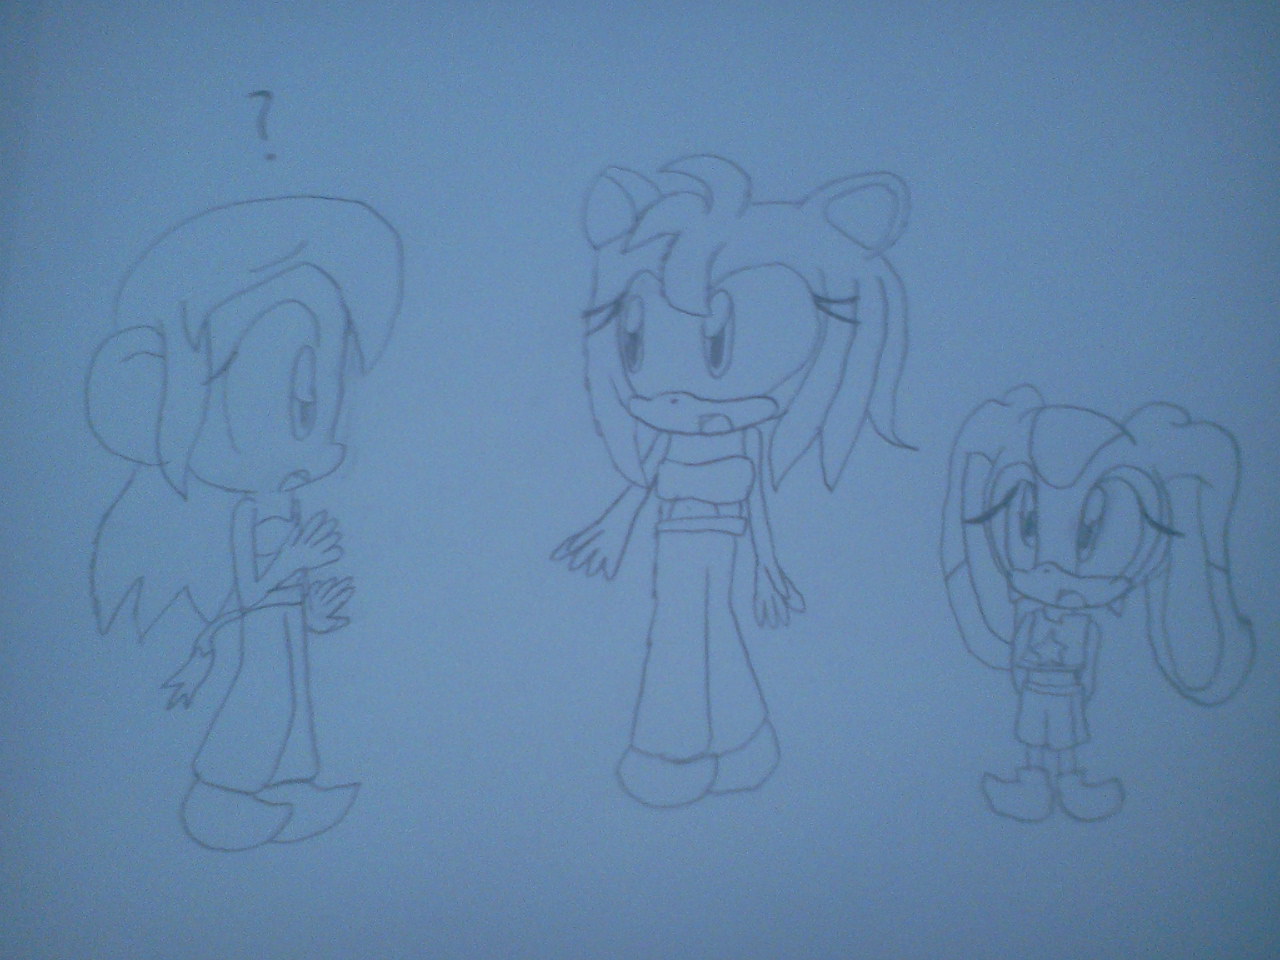 Art-Trade with tellyweb- Amy, Cream, and Lolo by CreamandPoppufan166